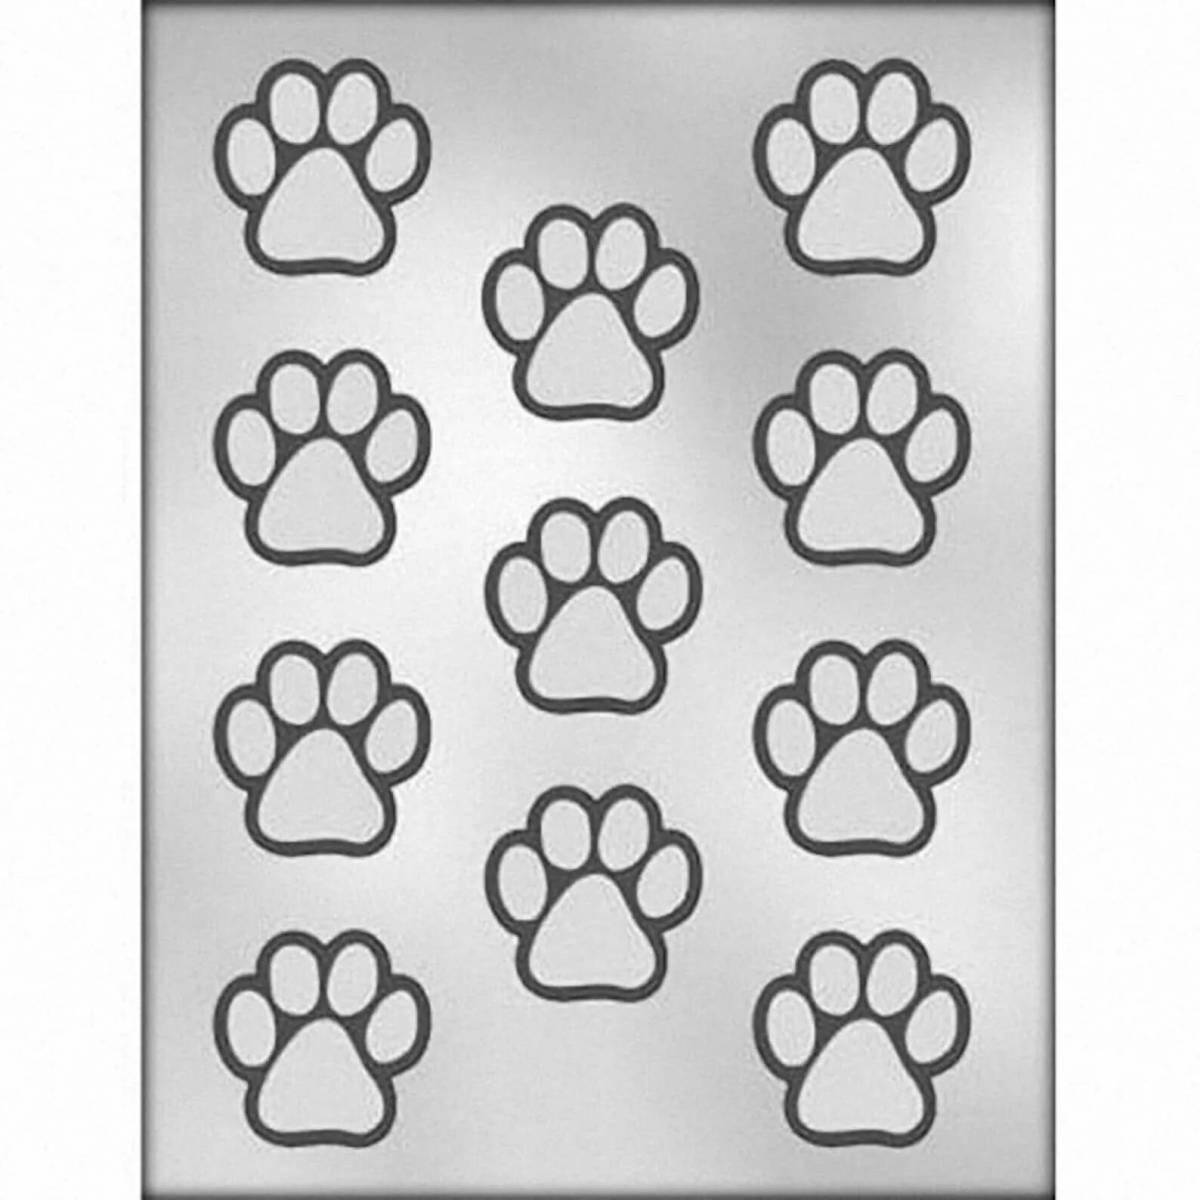 Adorable cat's paw coloring page